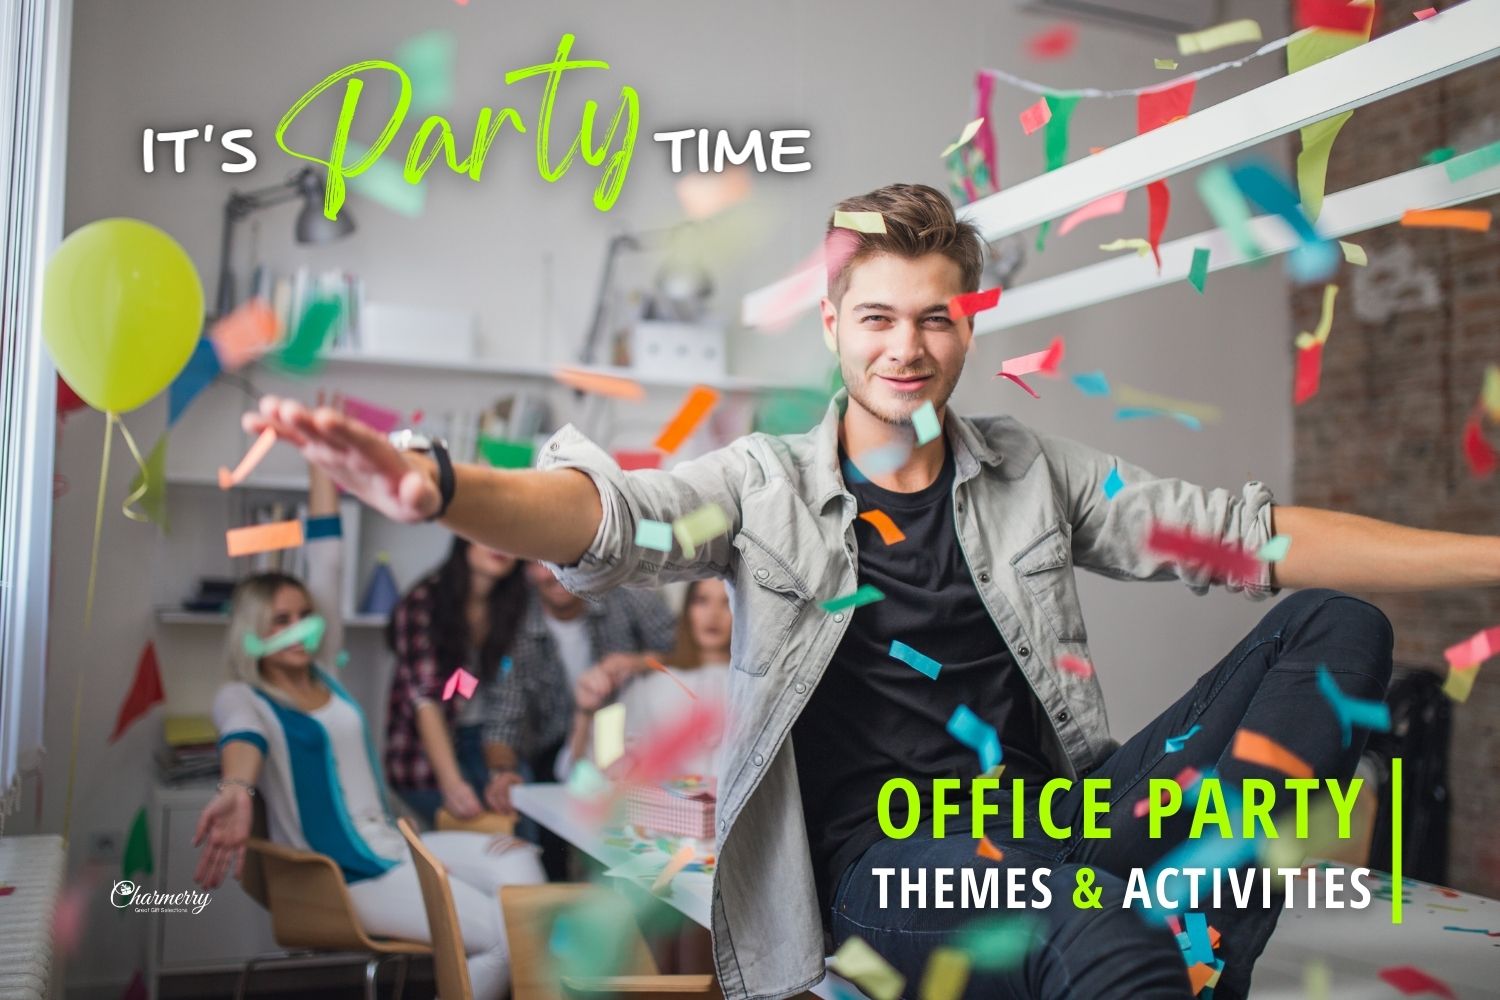 Office Party Theme Ideas That Are Simple to Plan